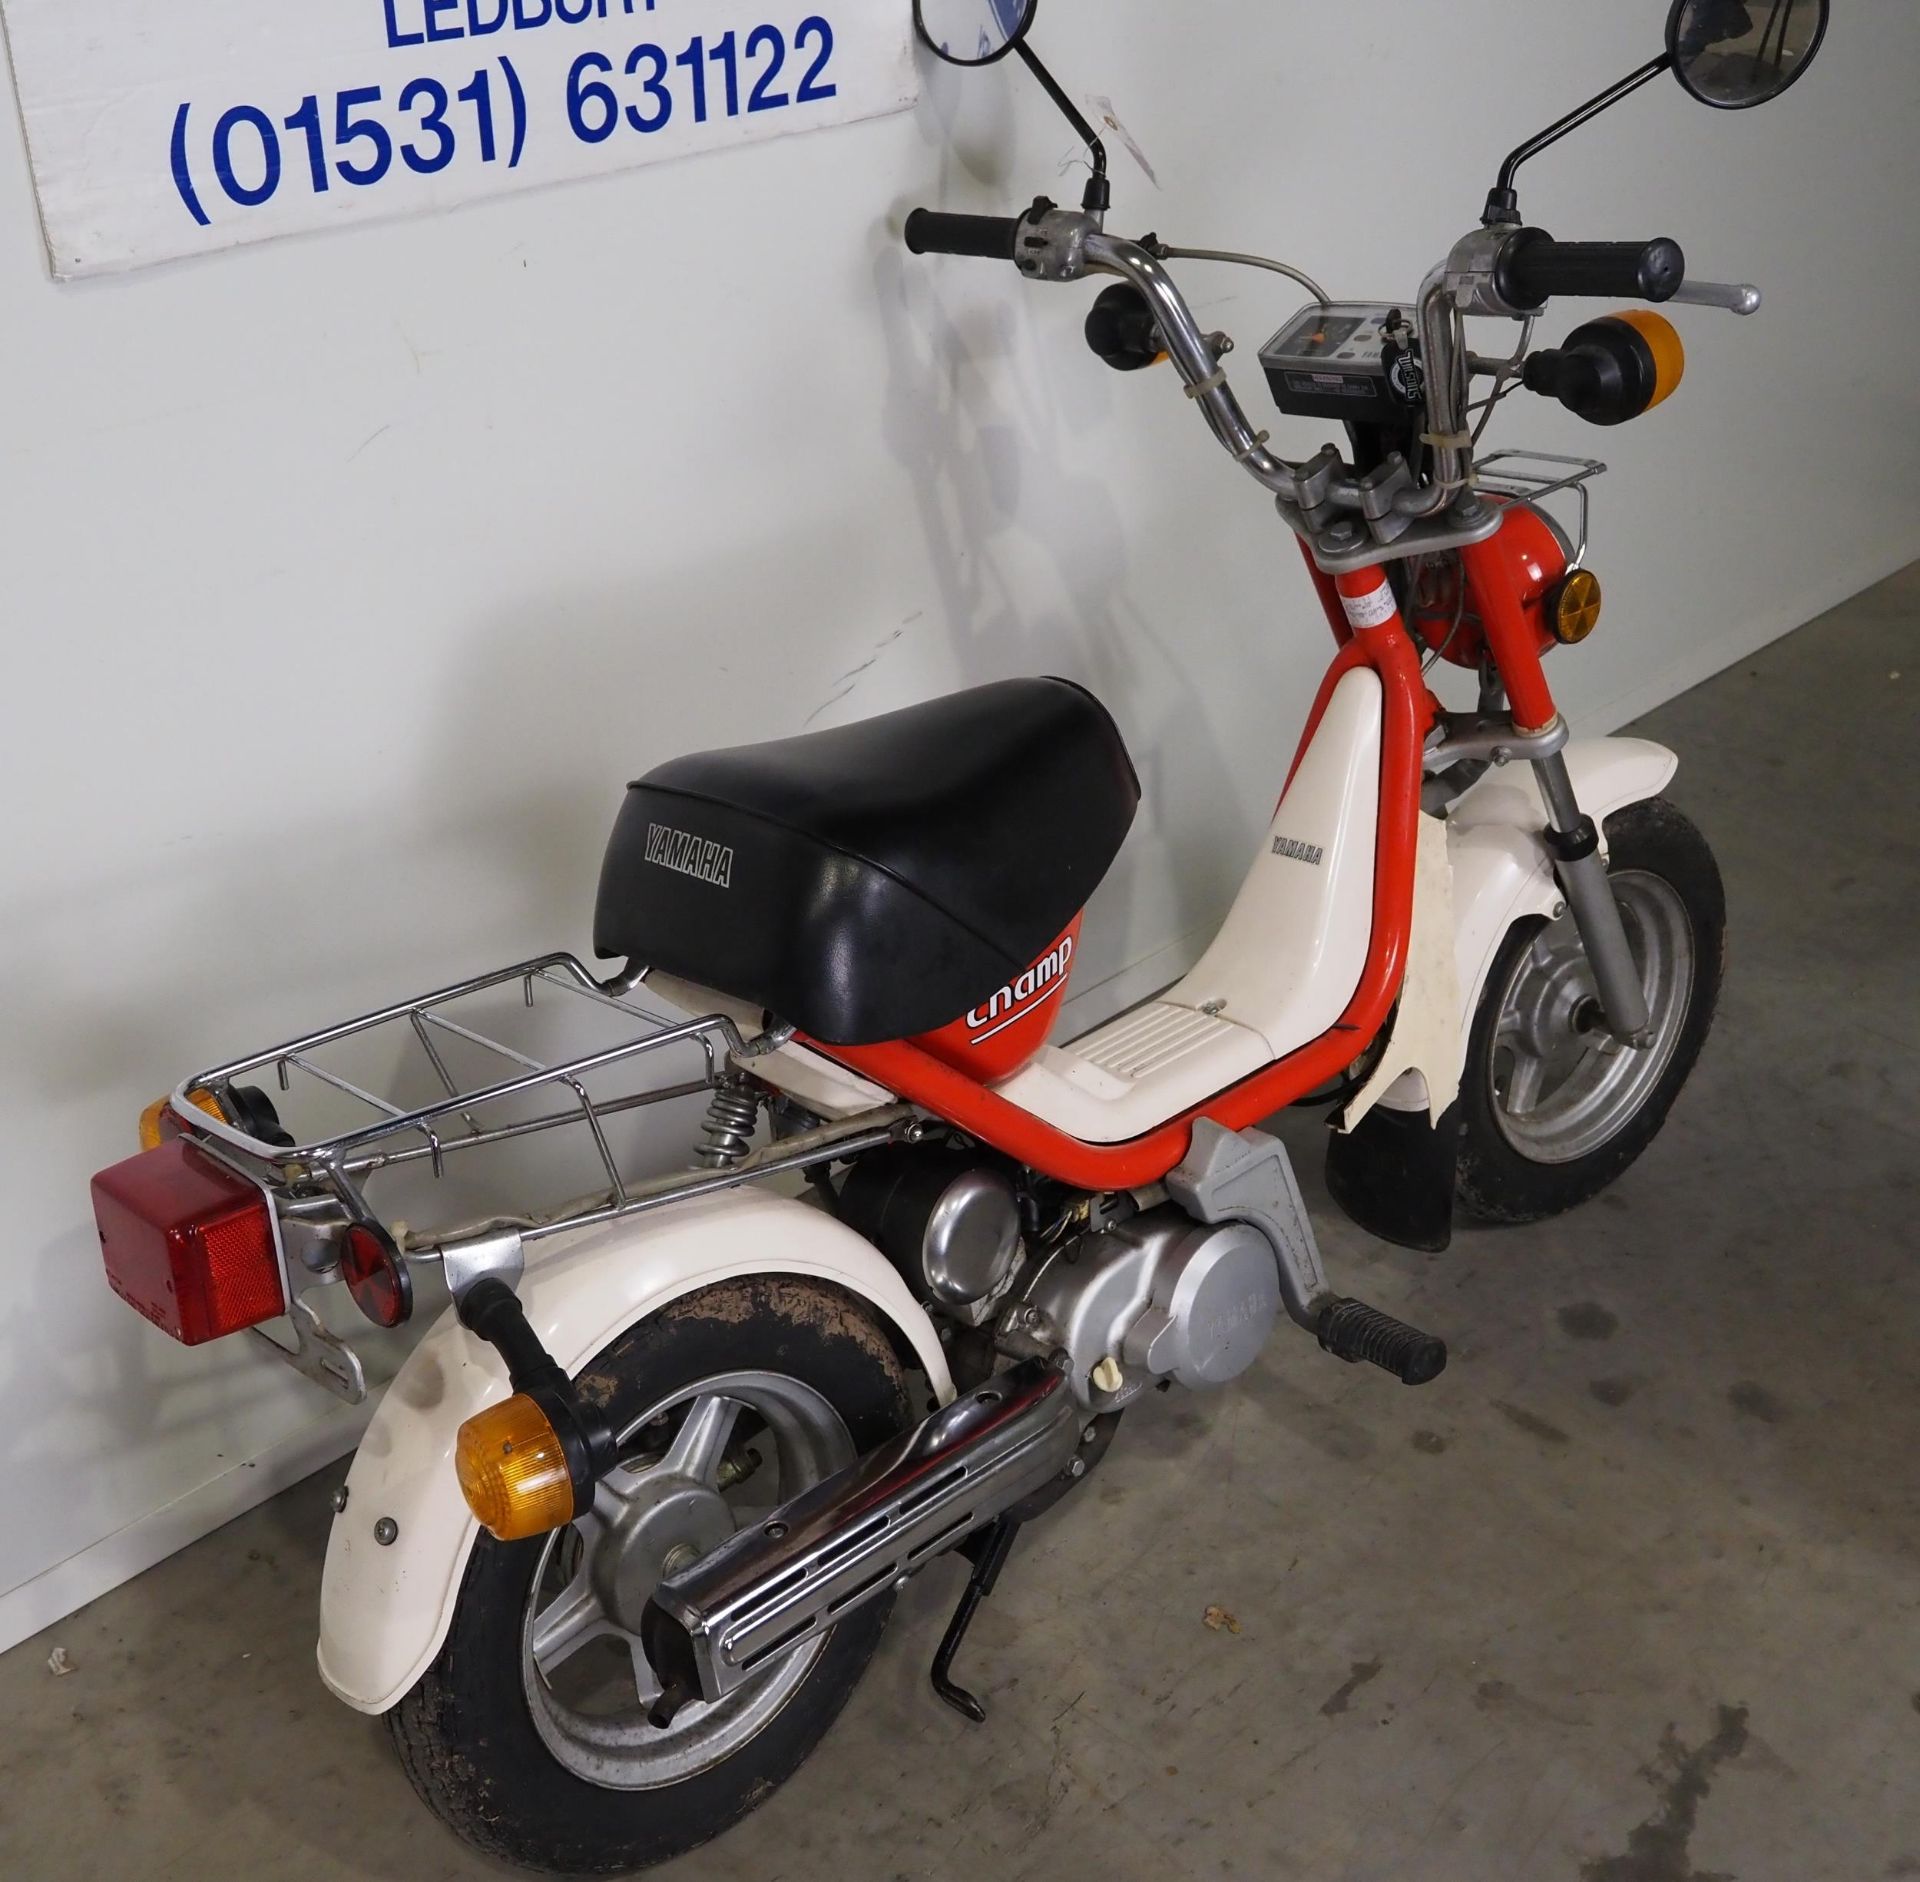 Yamaha Champ 50 moped. 1981. 50cc. Showing 23 miles from new. Has Nova number. Runs but requires - Image 4 of 5